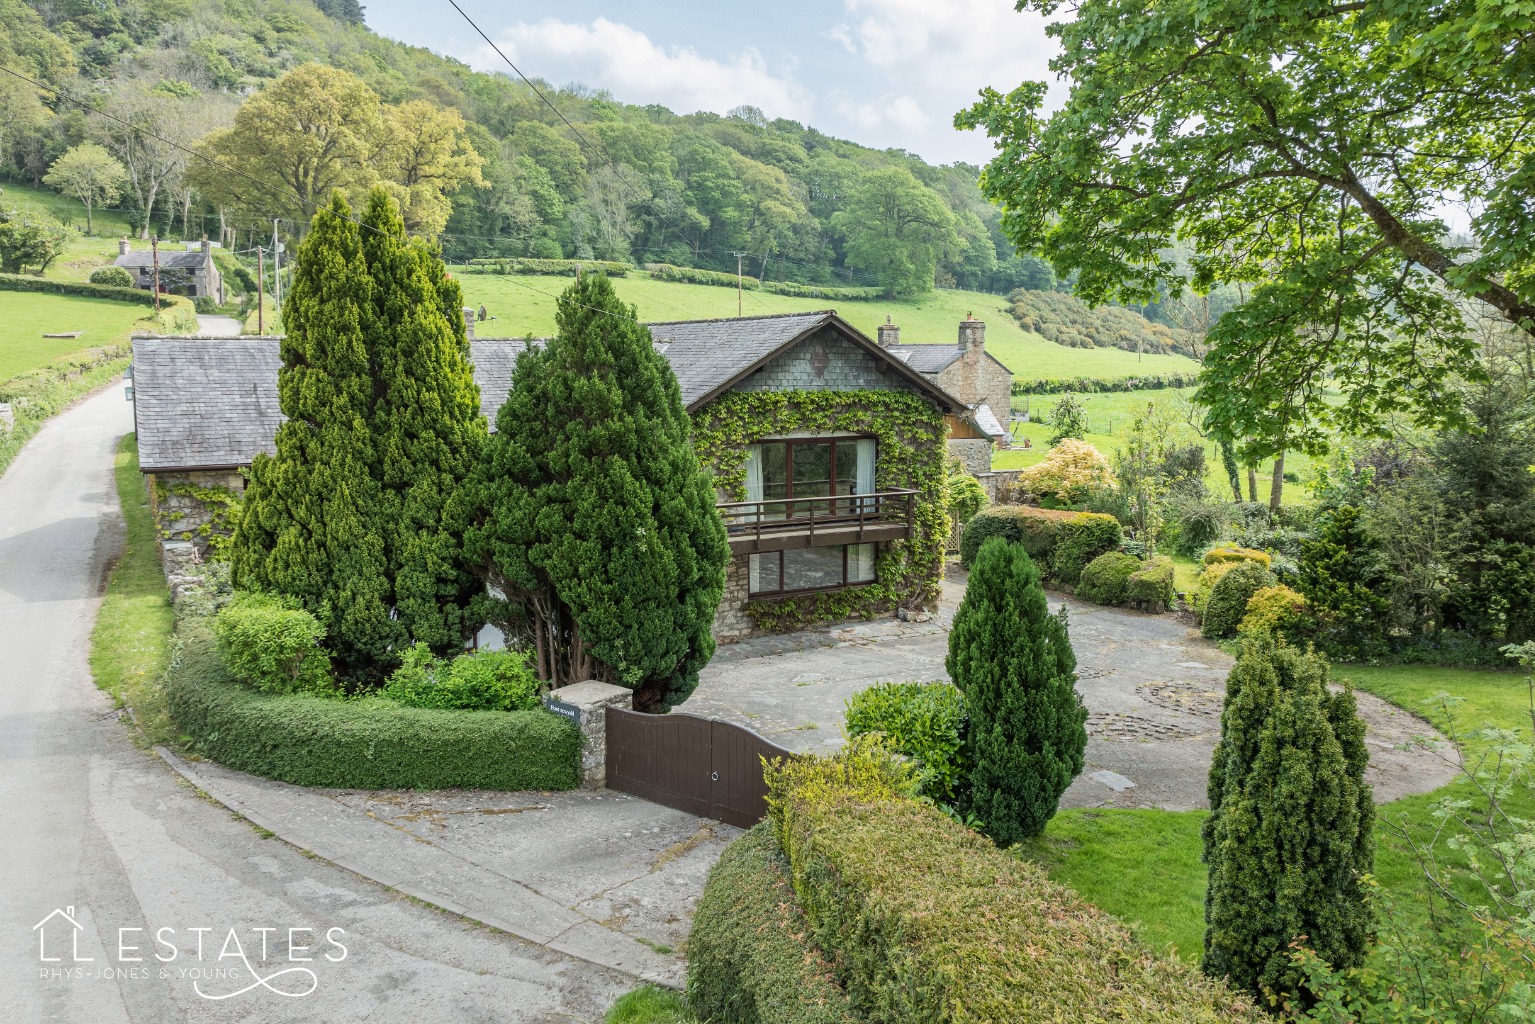 4 bed detached house for sale in Bont Newydd  - Property Image 2